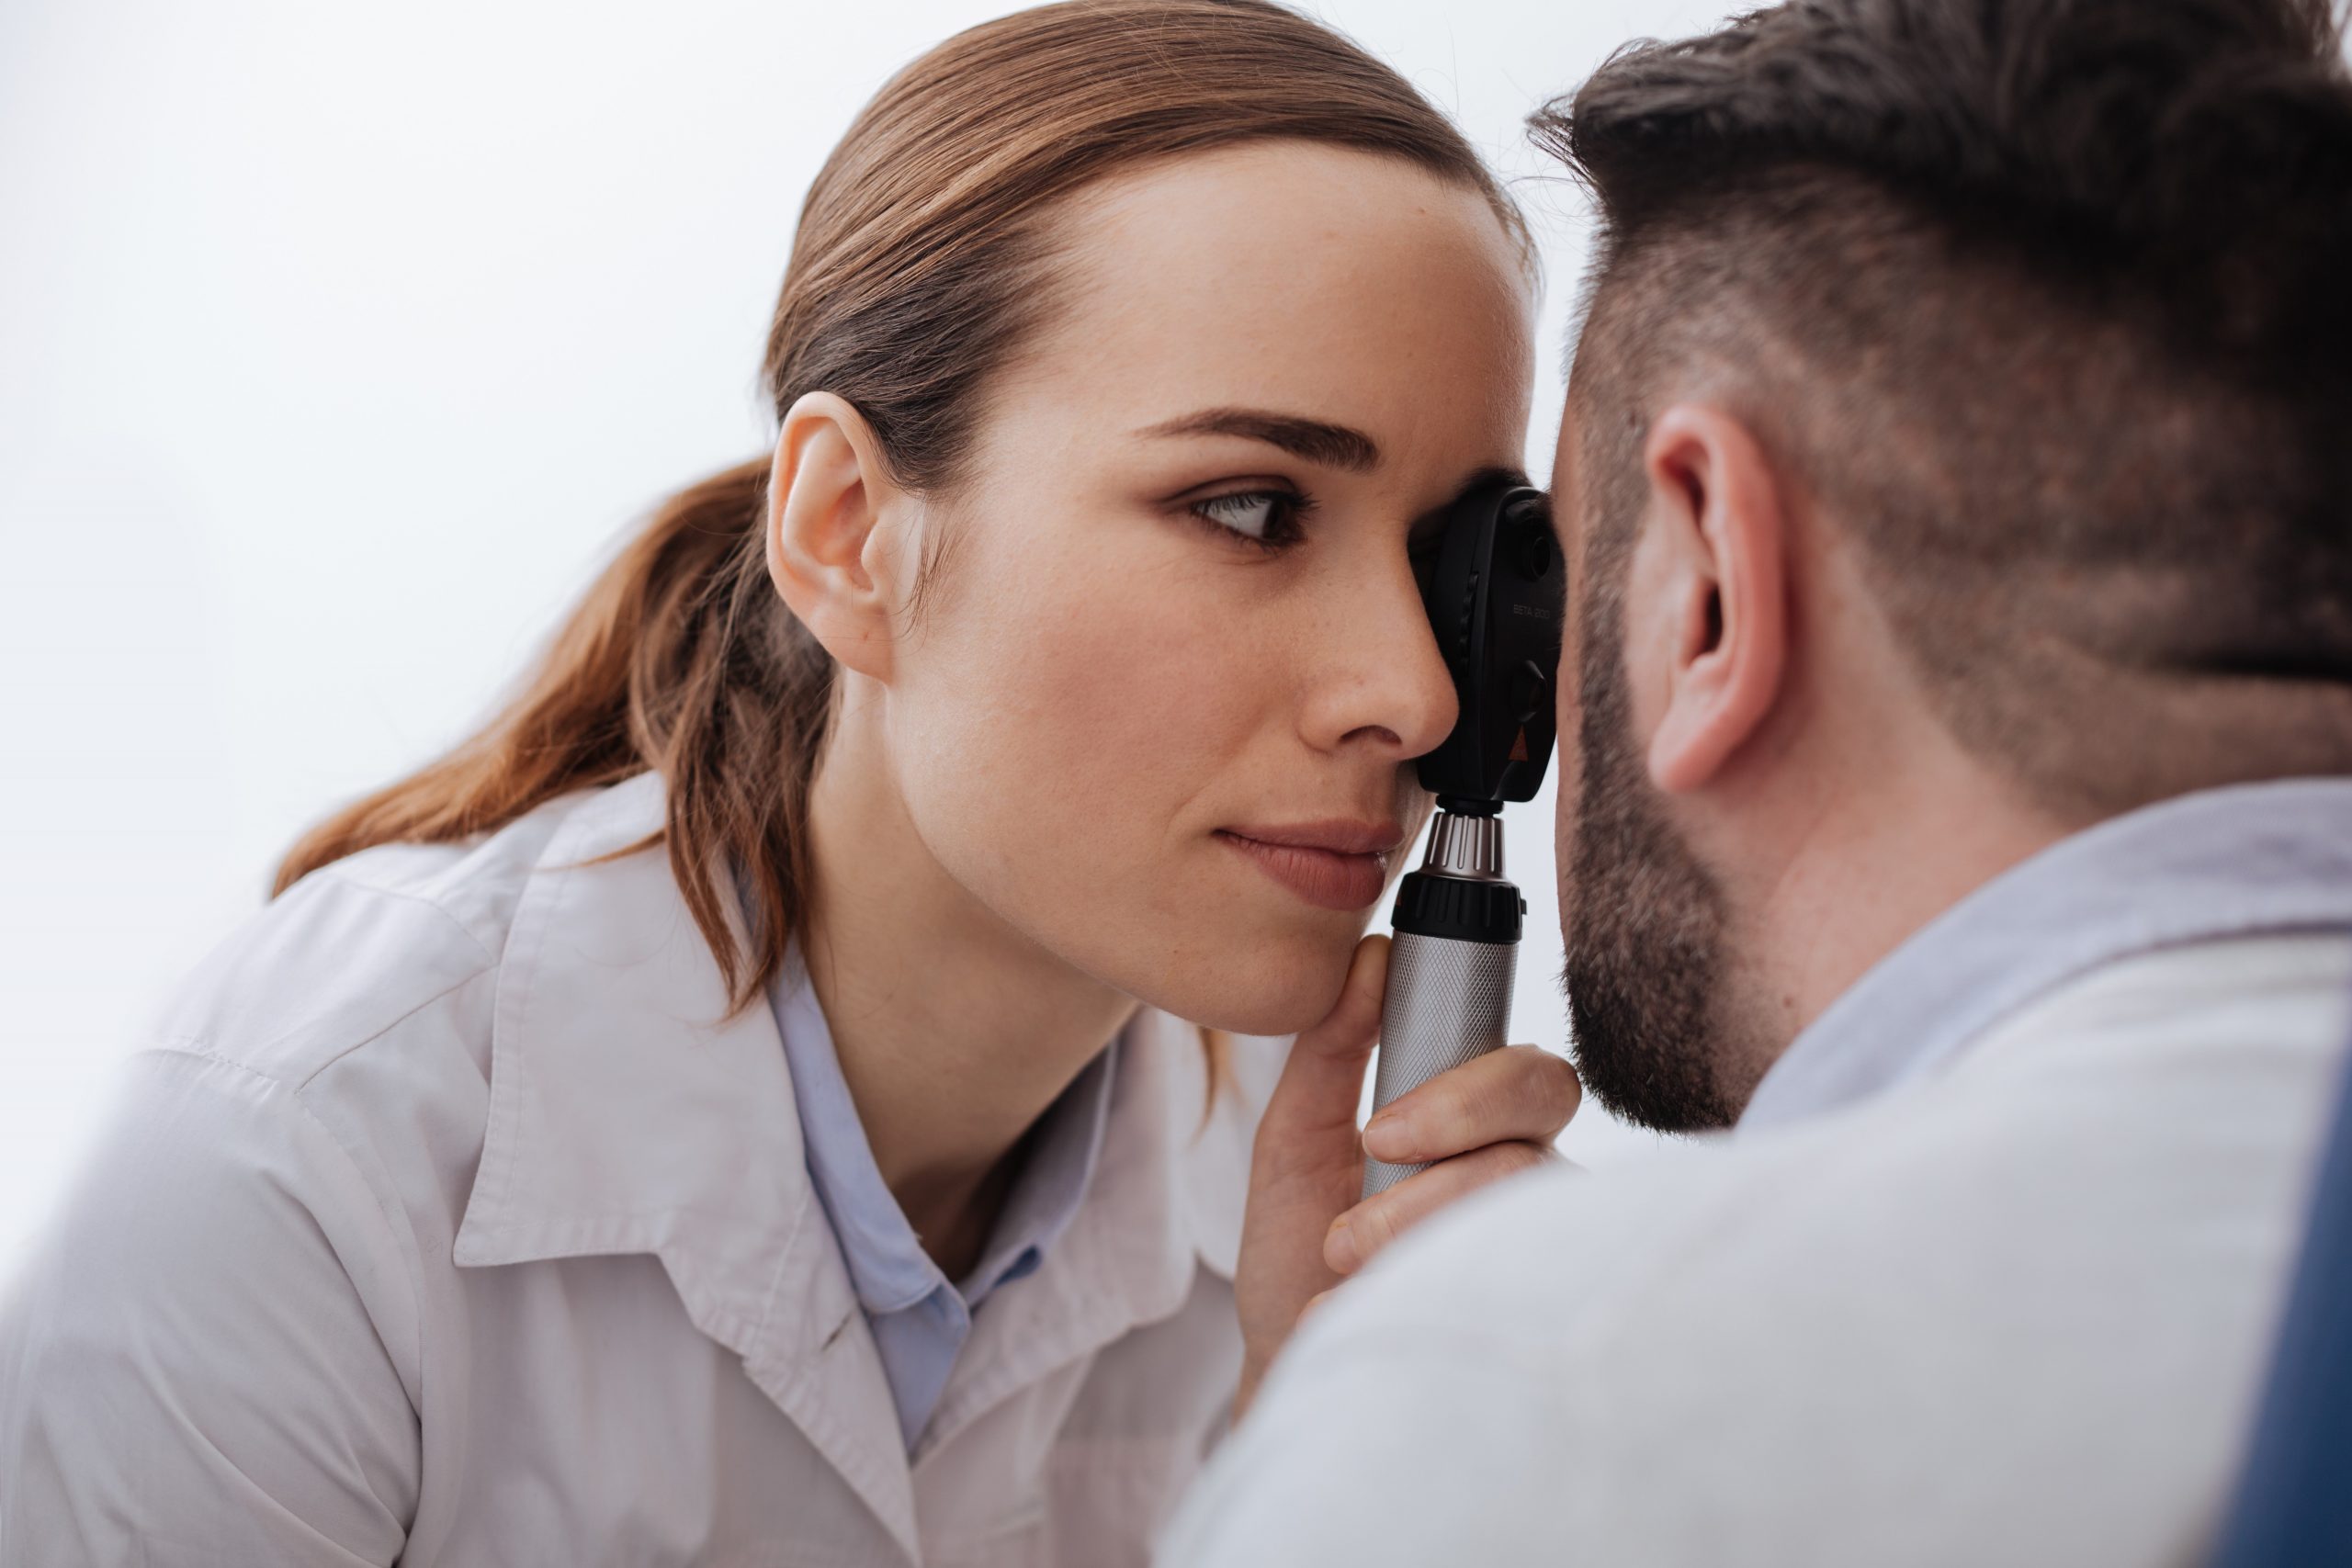 Pleasant pretty woman holding an ophthalmoscope